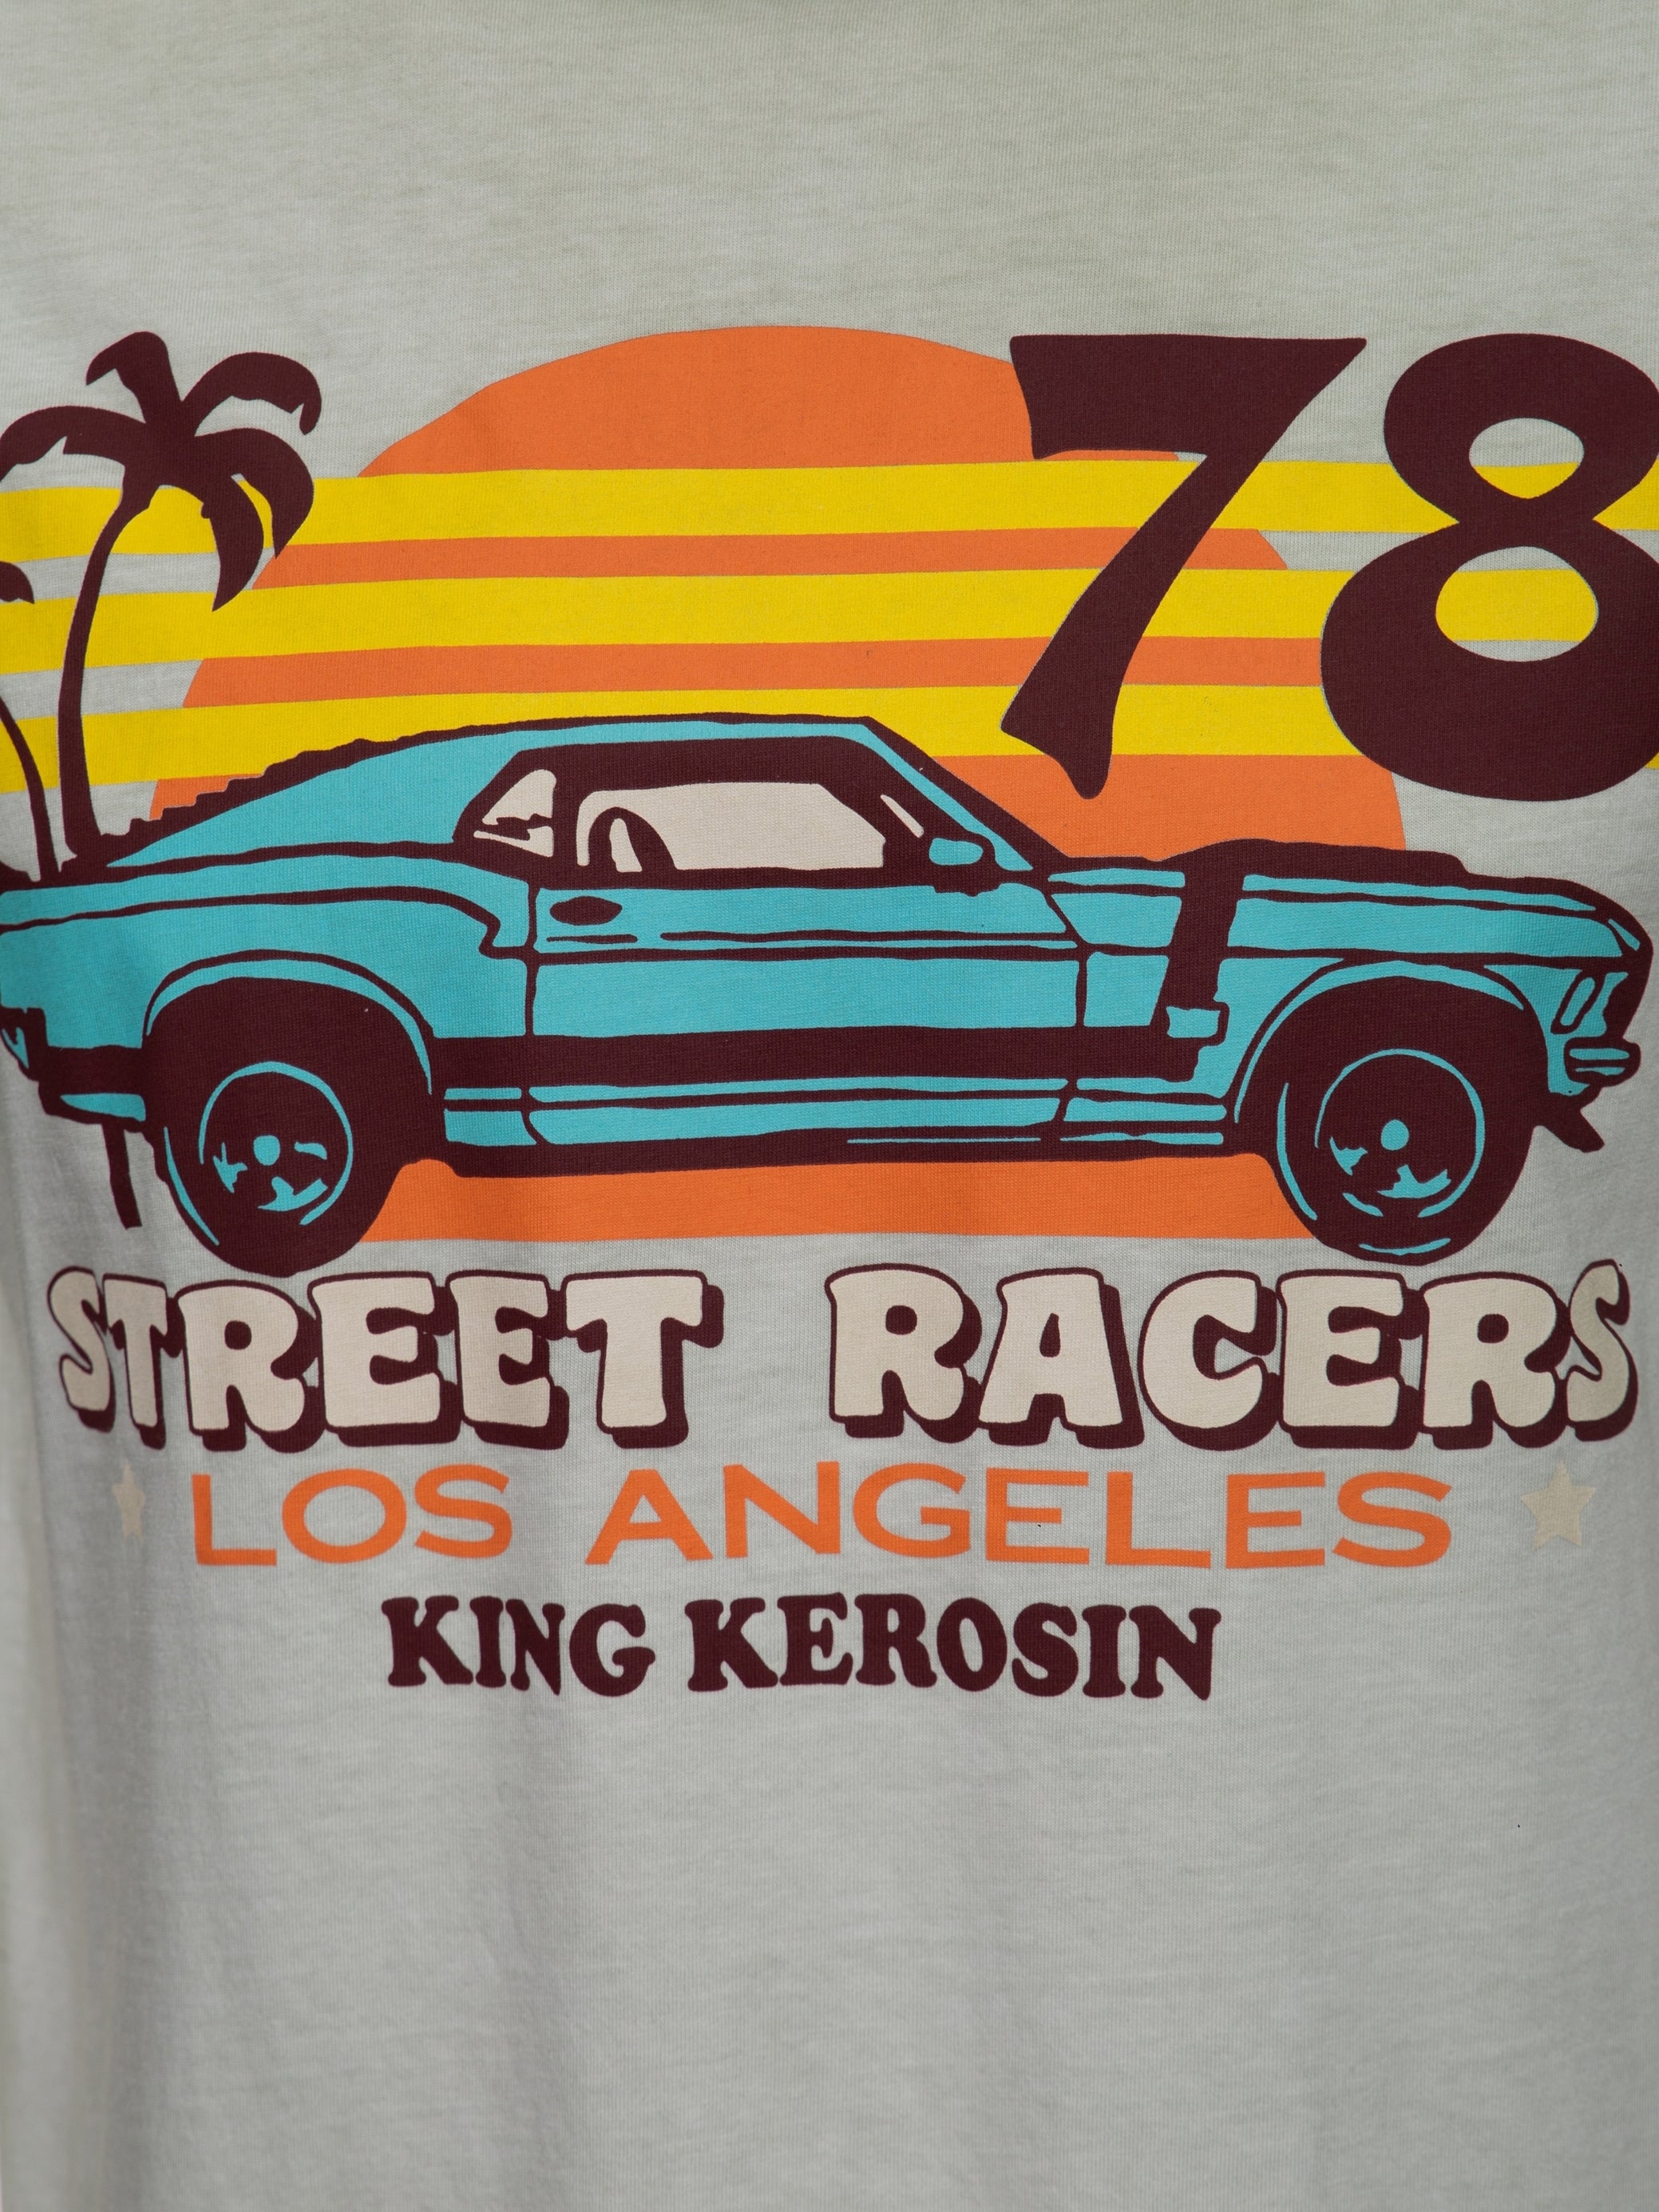 Oilwashed T-Shirt "Street Racers L.A."